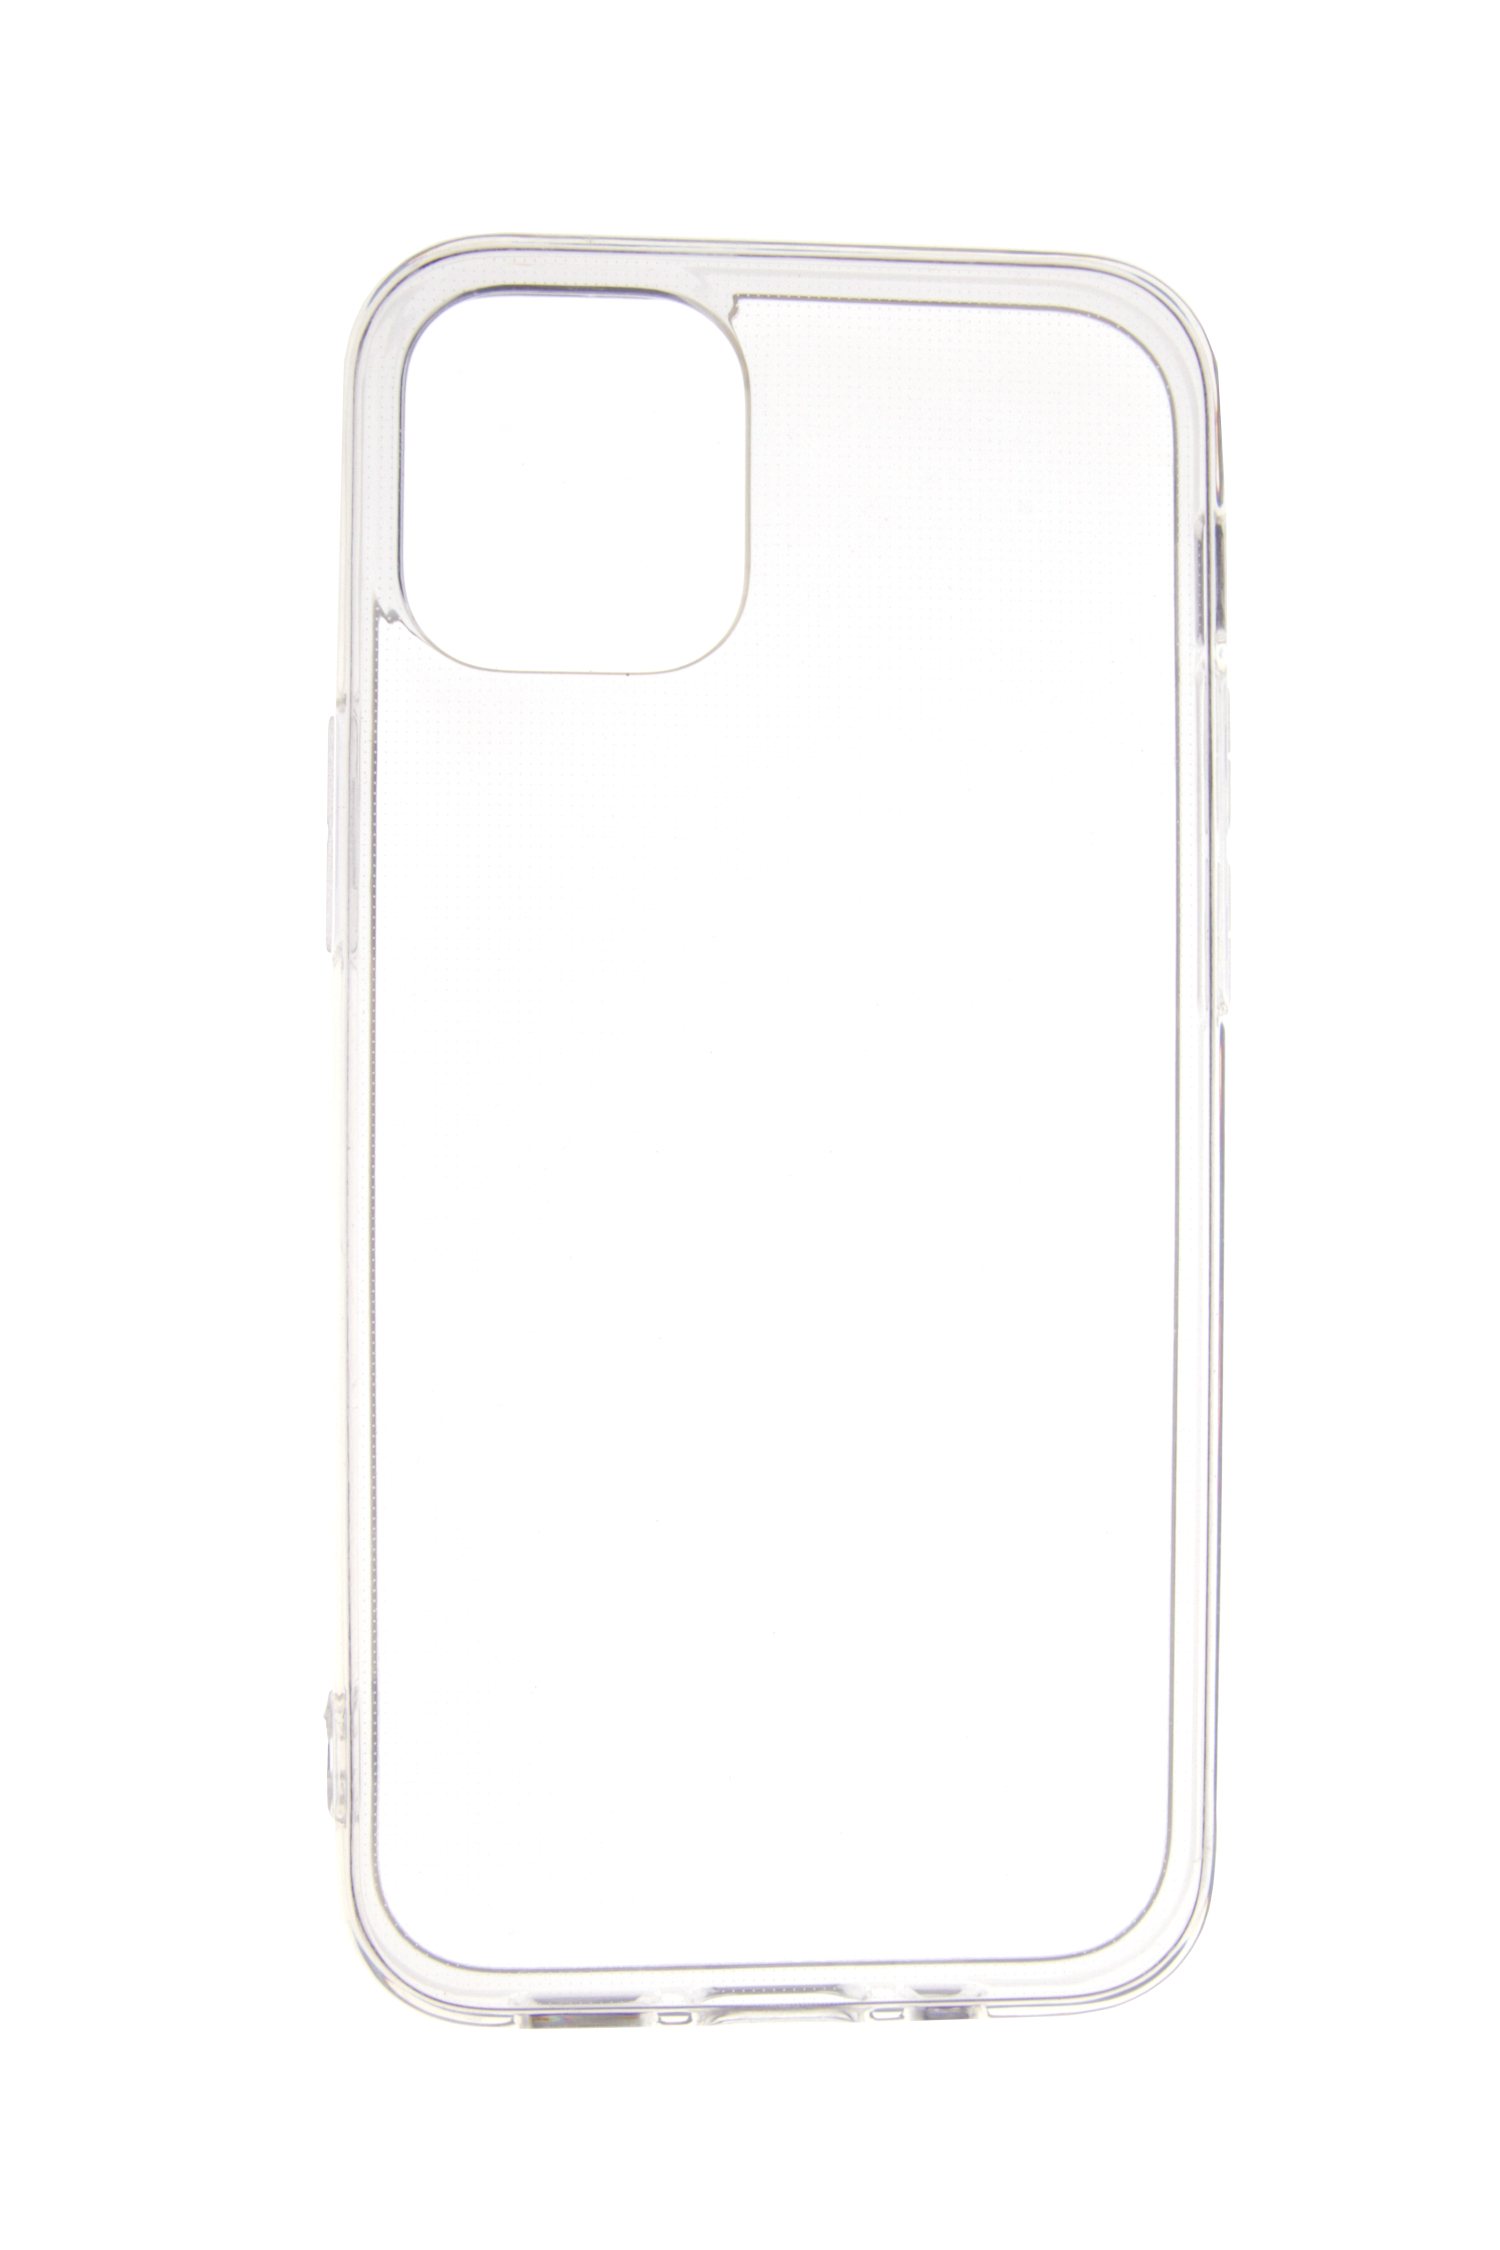 Transparent mini, mm JAMCOVER iPhone TPU 12 Case 2.0 Backcover, Apple, Strong,